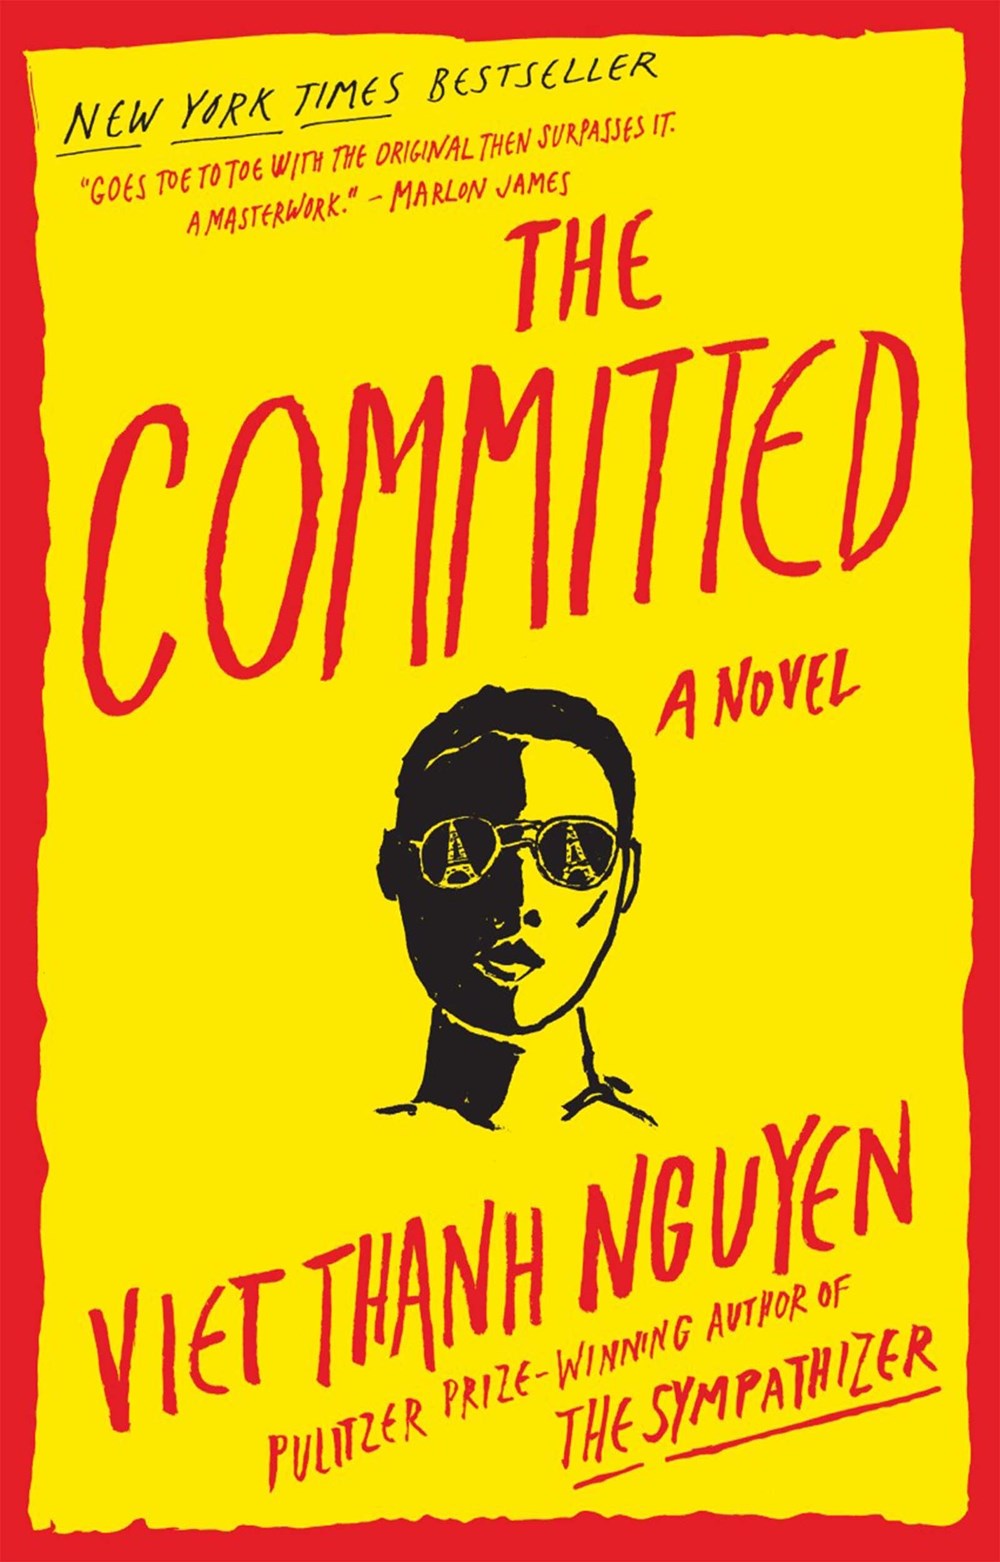 The Committed: A Novel by Viet Thanh Nguyen (The Sympathizer, Book 2)